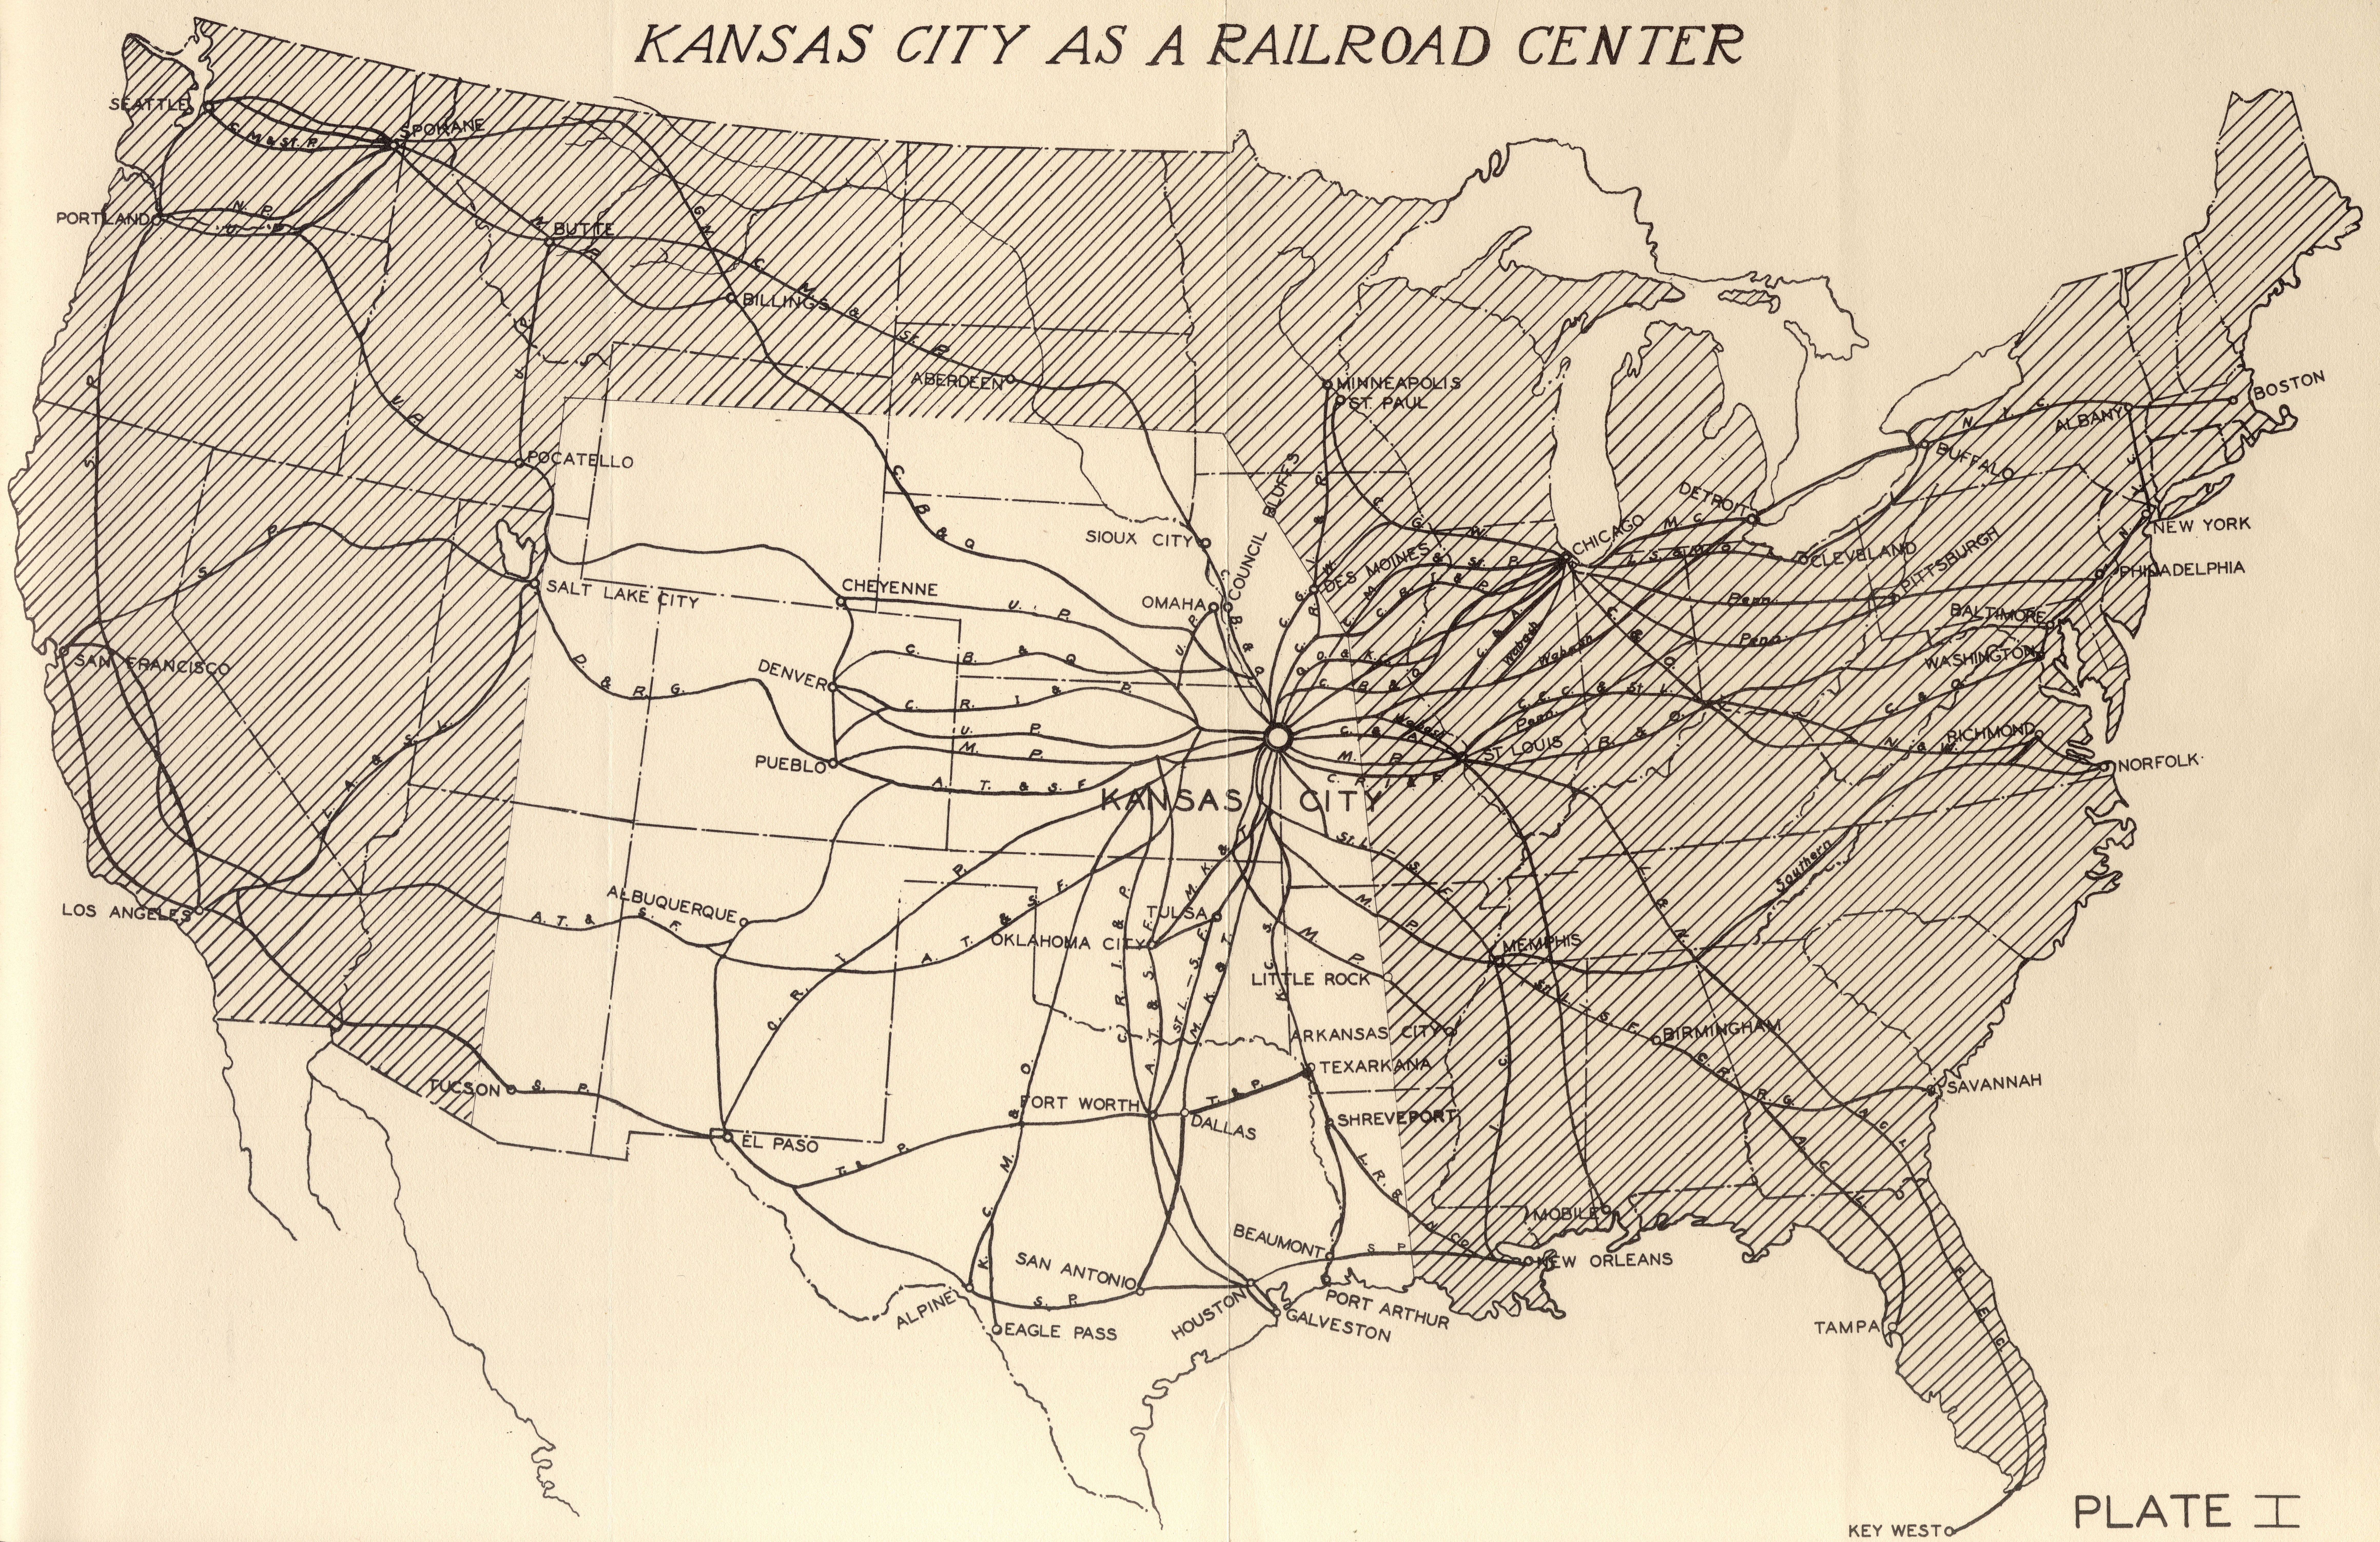 1930 map showing Kansas City as the nation’s railroad center.